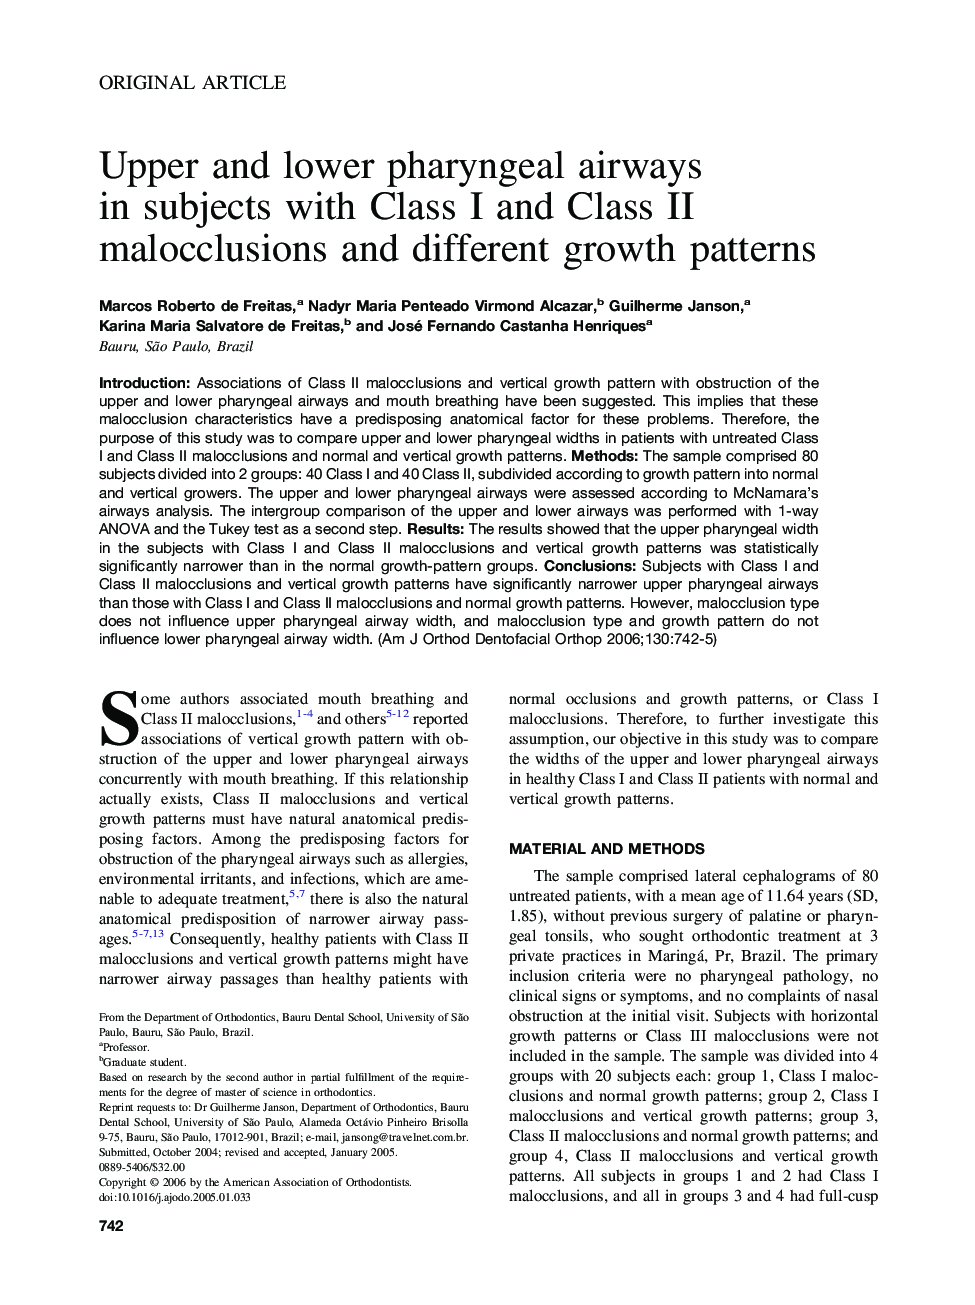 Upper and lower pharyngeal airways in subjects with Class I and Class II malocclusions and different growth patterns 